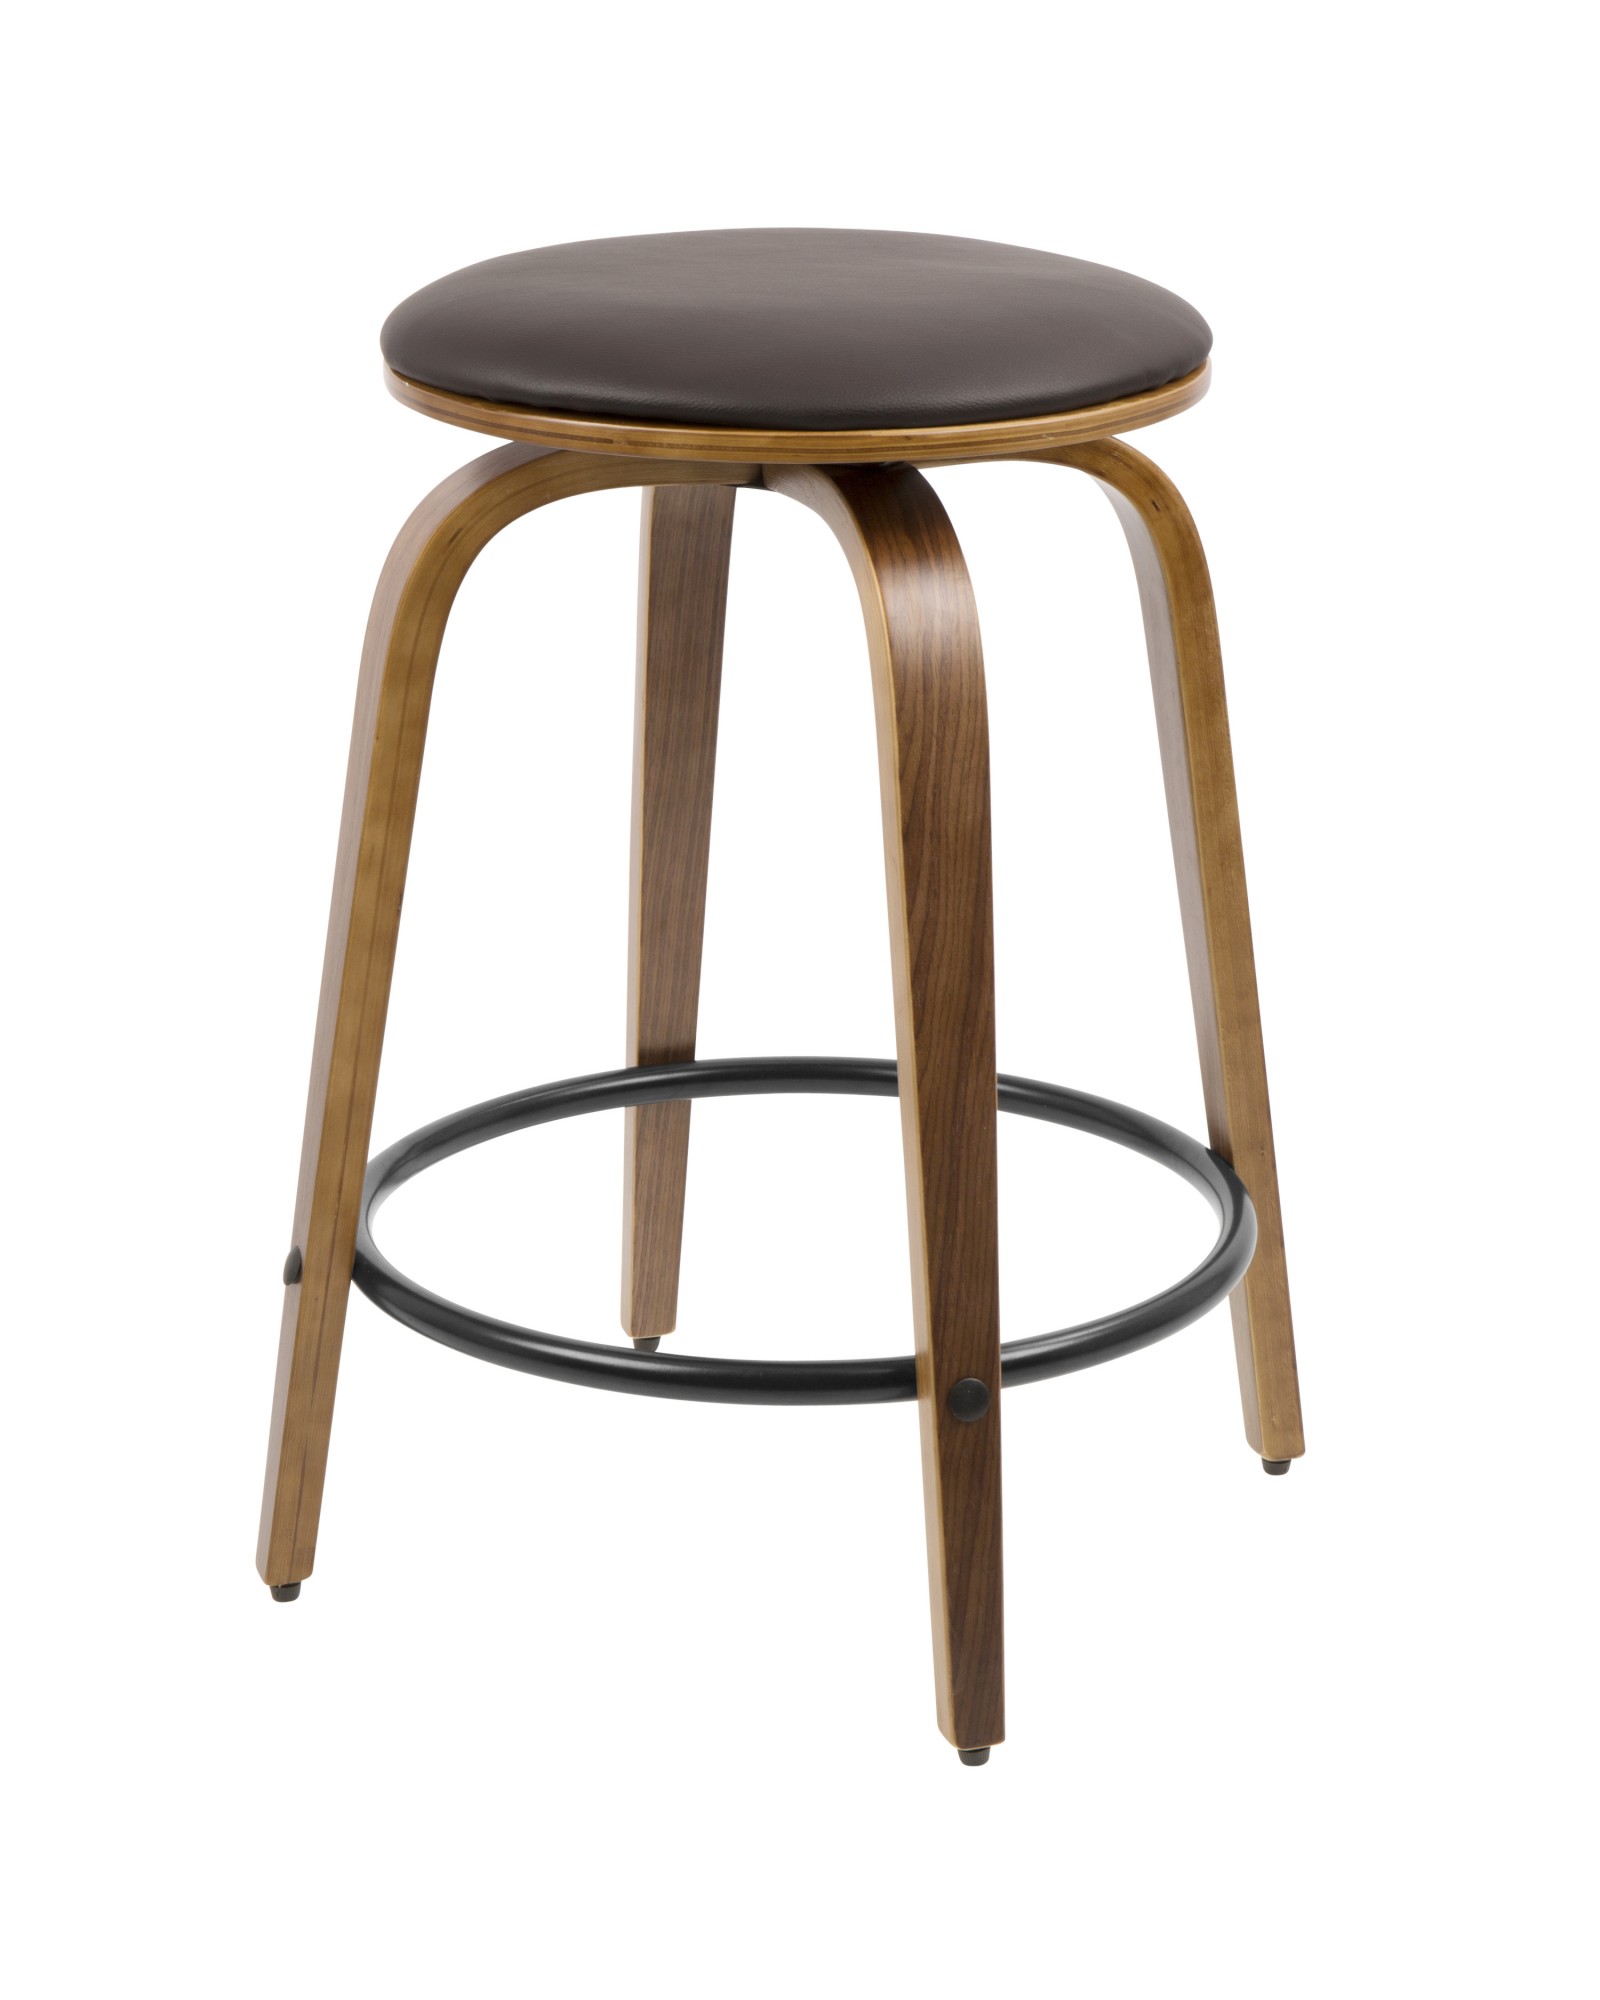 Porto Mid-Century Modern Counter Stool in Walnut and Brown Faux Leather with Black Footrest - Set of 2